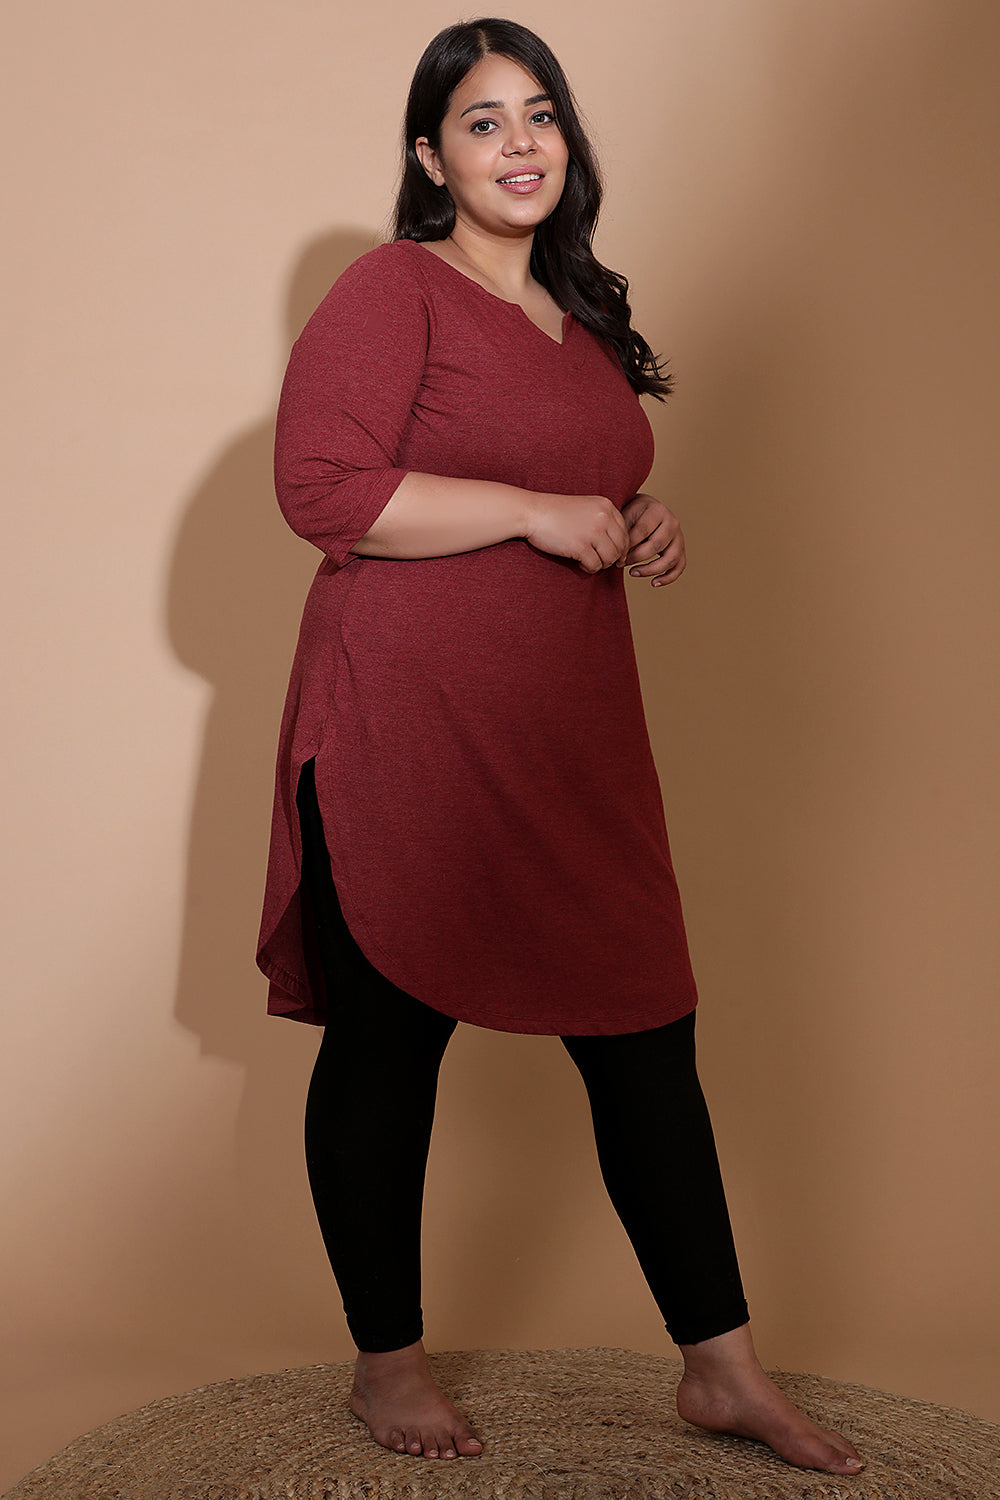 Plus Size Clothing Online Store in India - LASTINCH - LASTINCH Plus Size  Store - SideProjectors